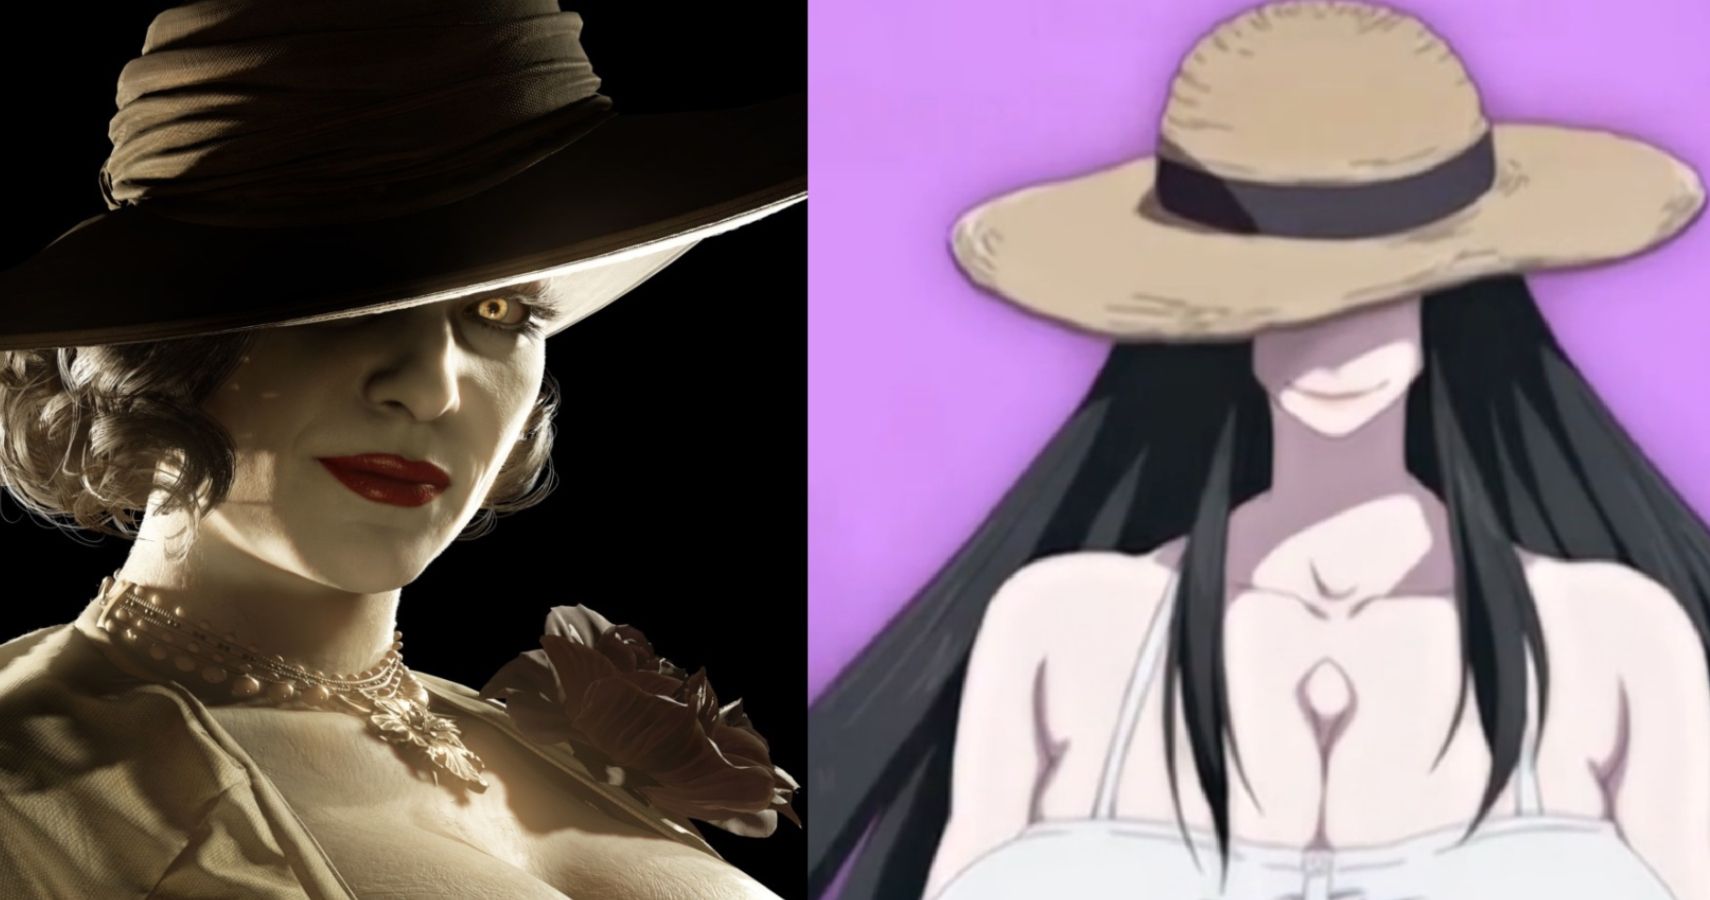 Resident Evil Villages Tall Vampire Lady Dimitrescu Could Be Based On This Japanese Urban Legend